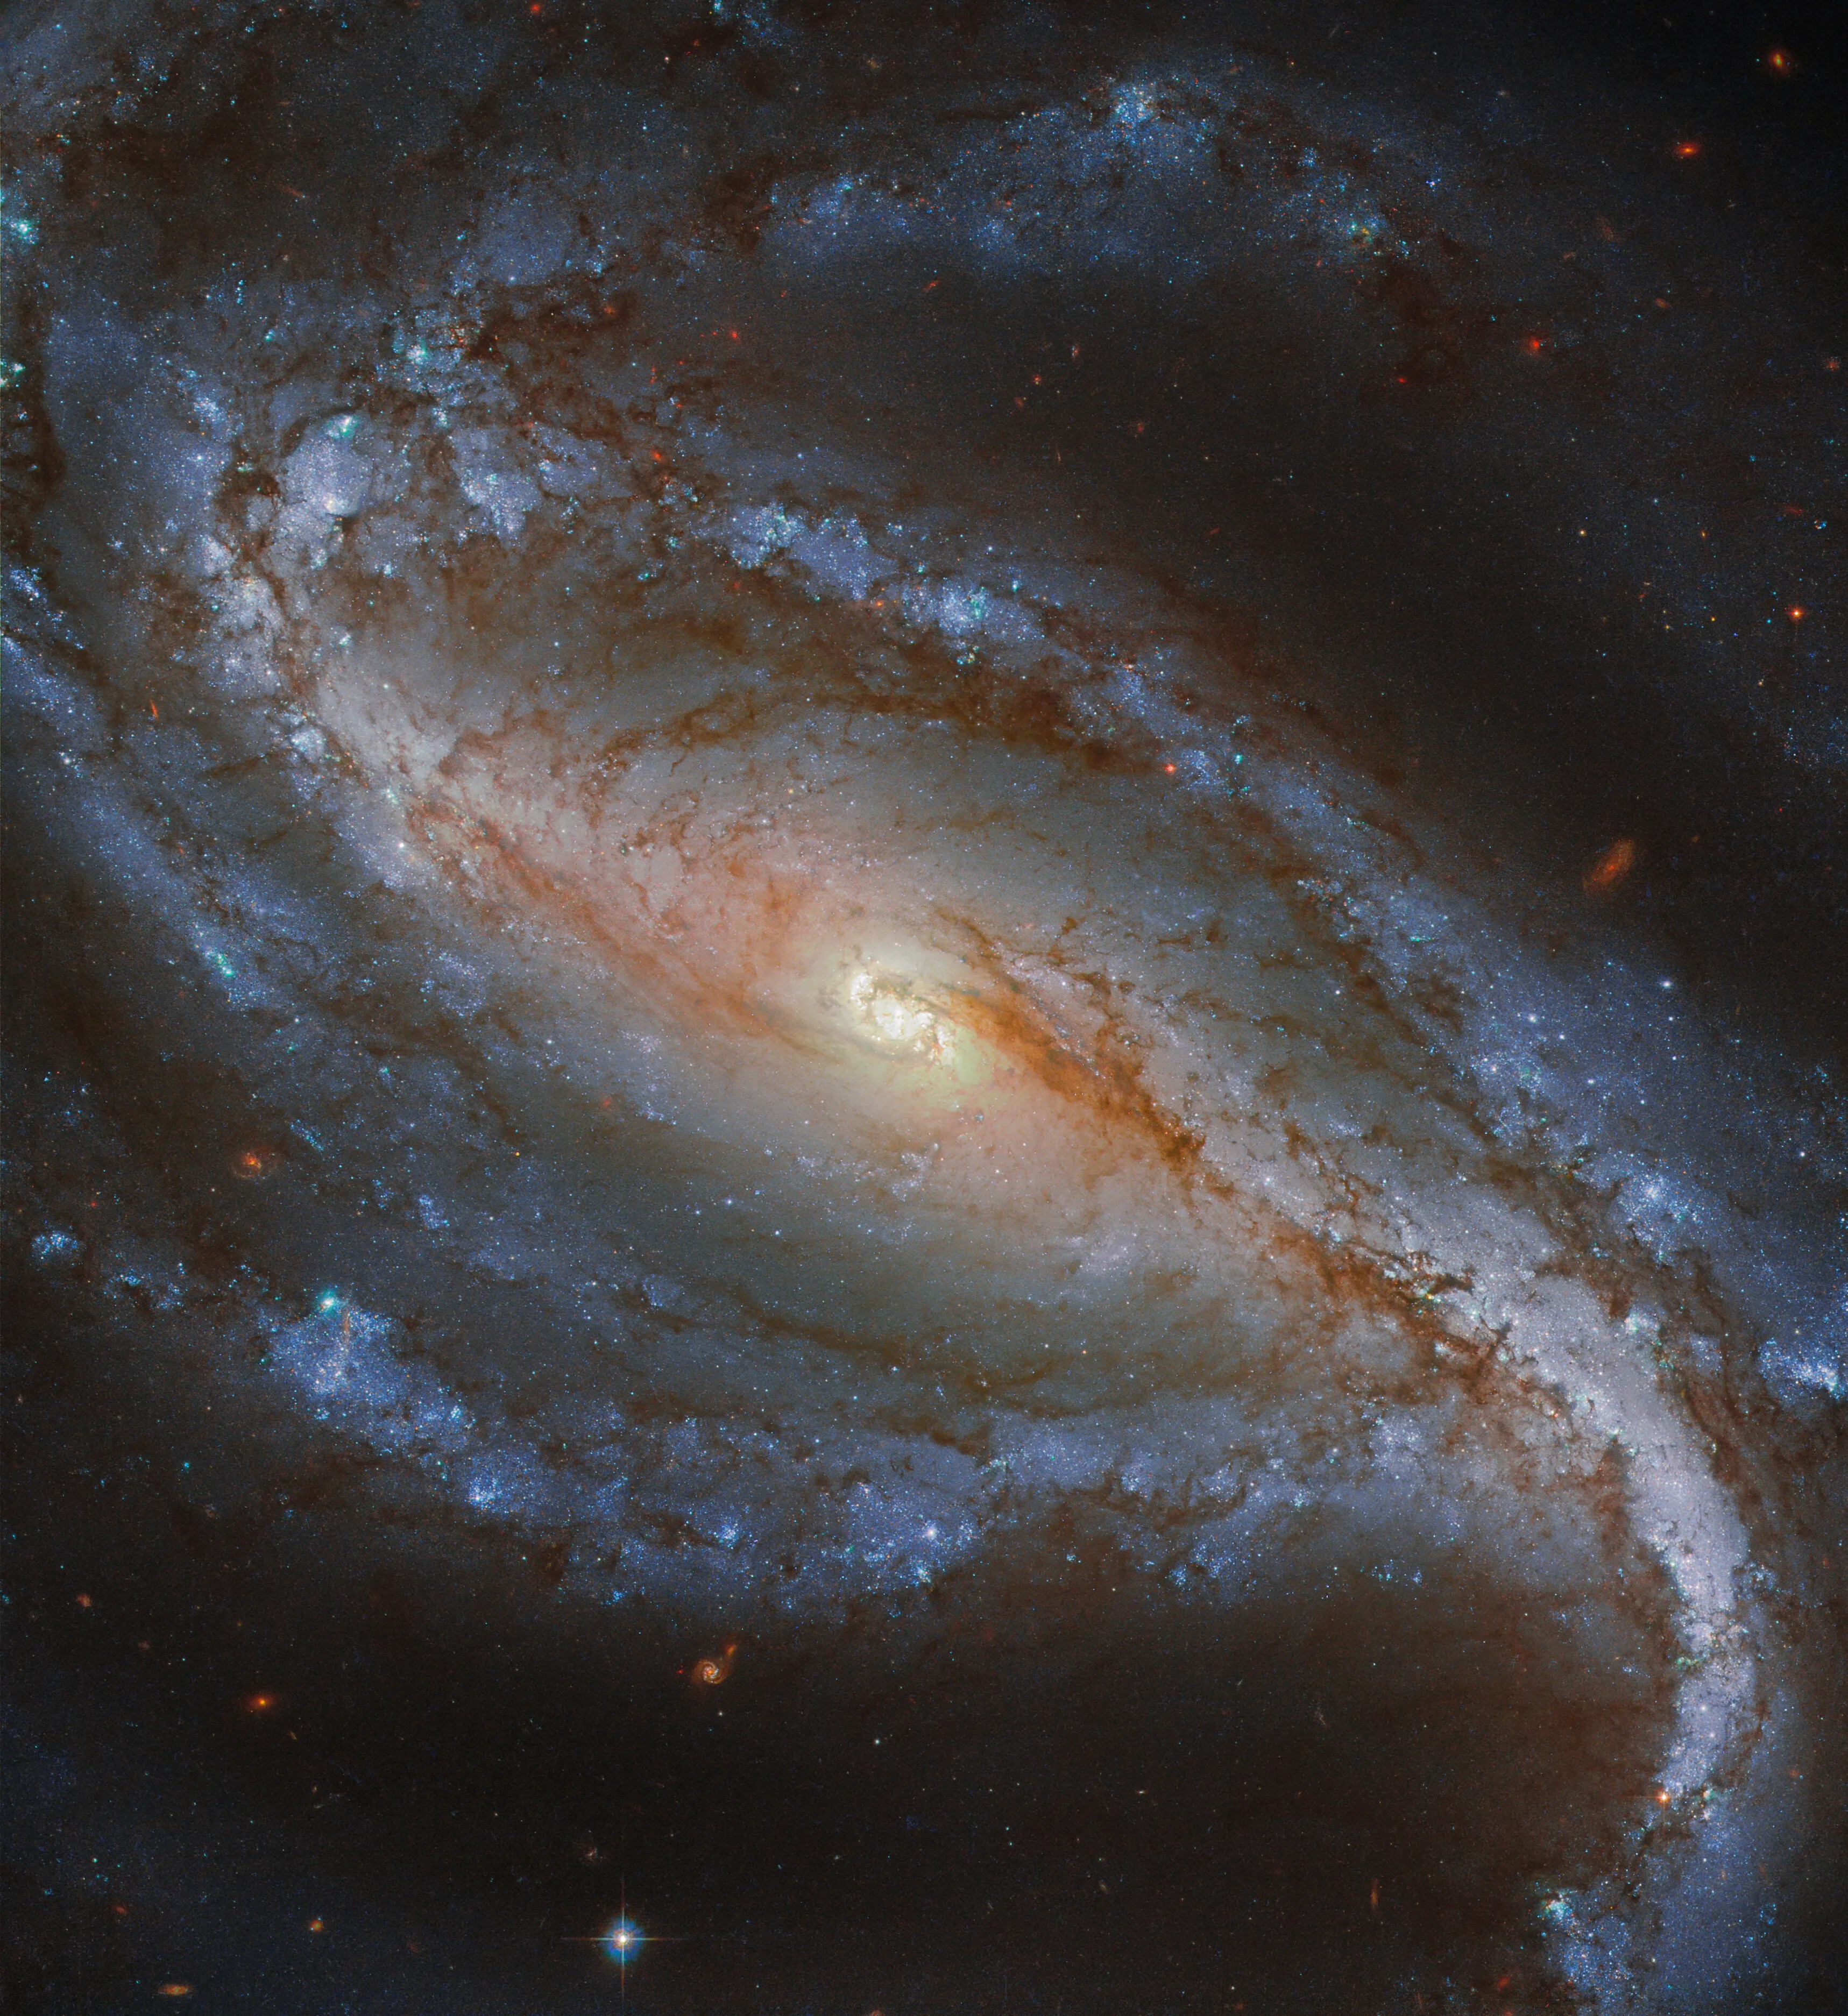 First discovered in 1798 ngc 613 is a galaxy which lies in the southern constellation of sculptor 67.